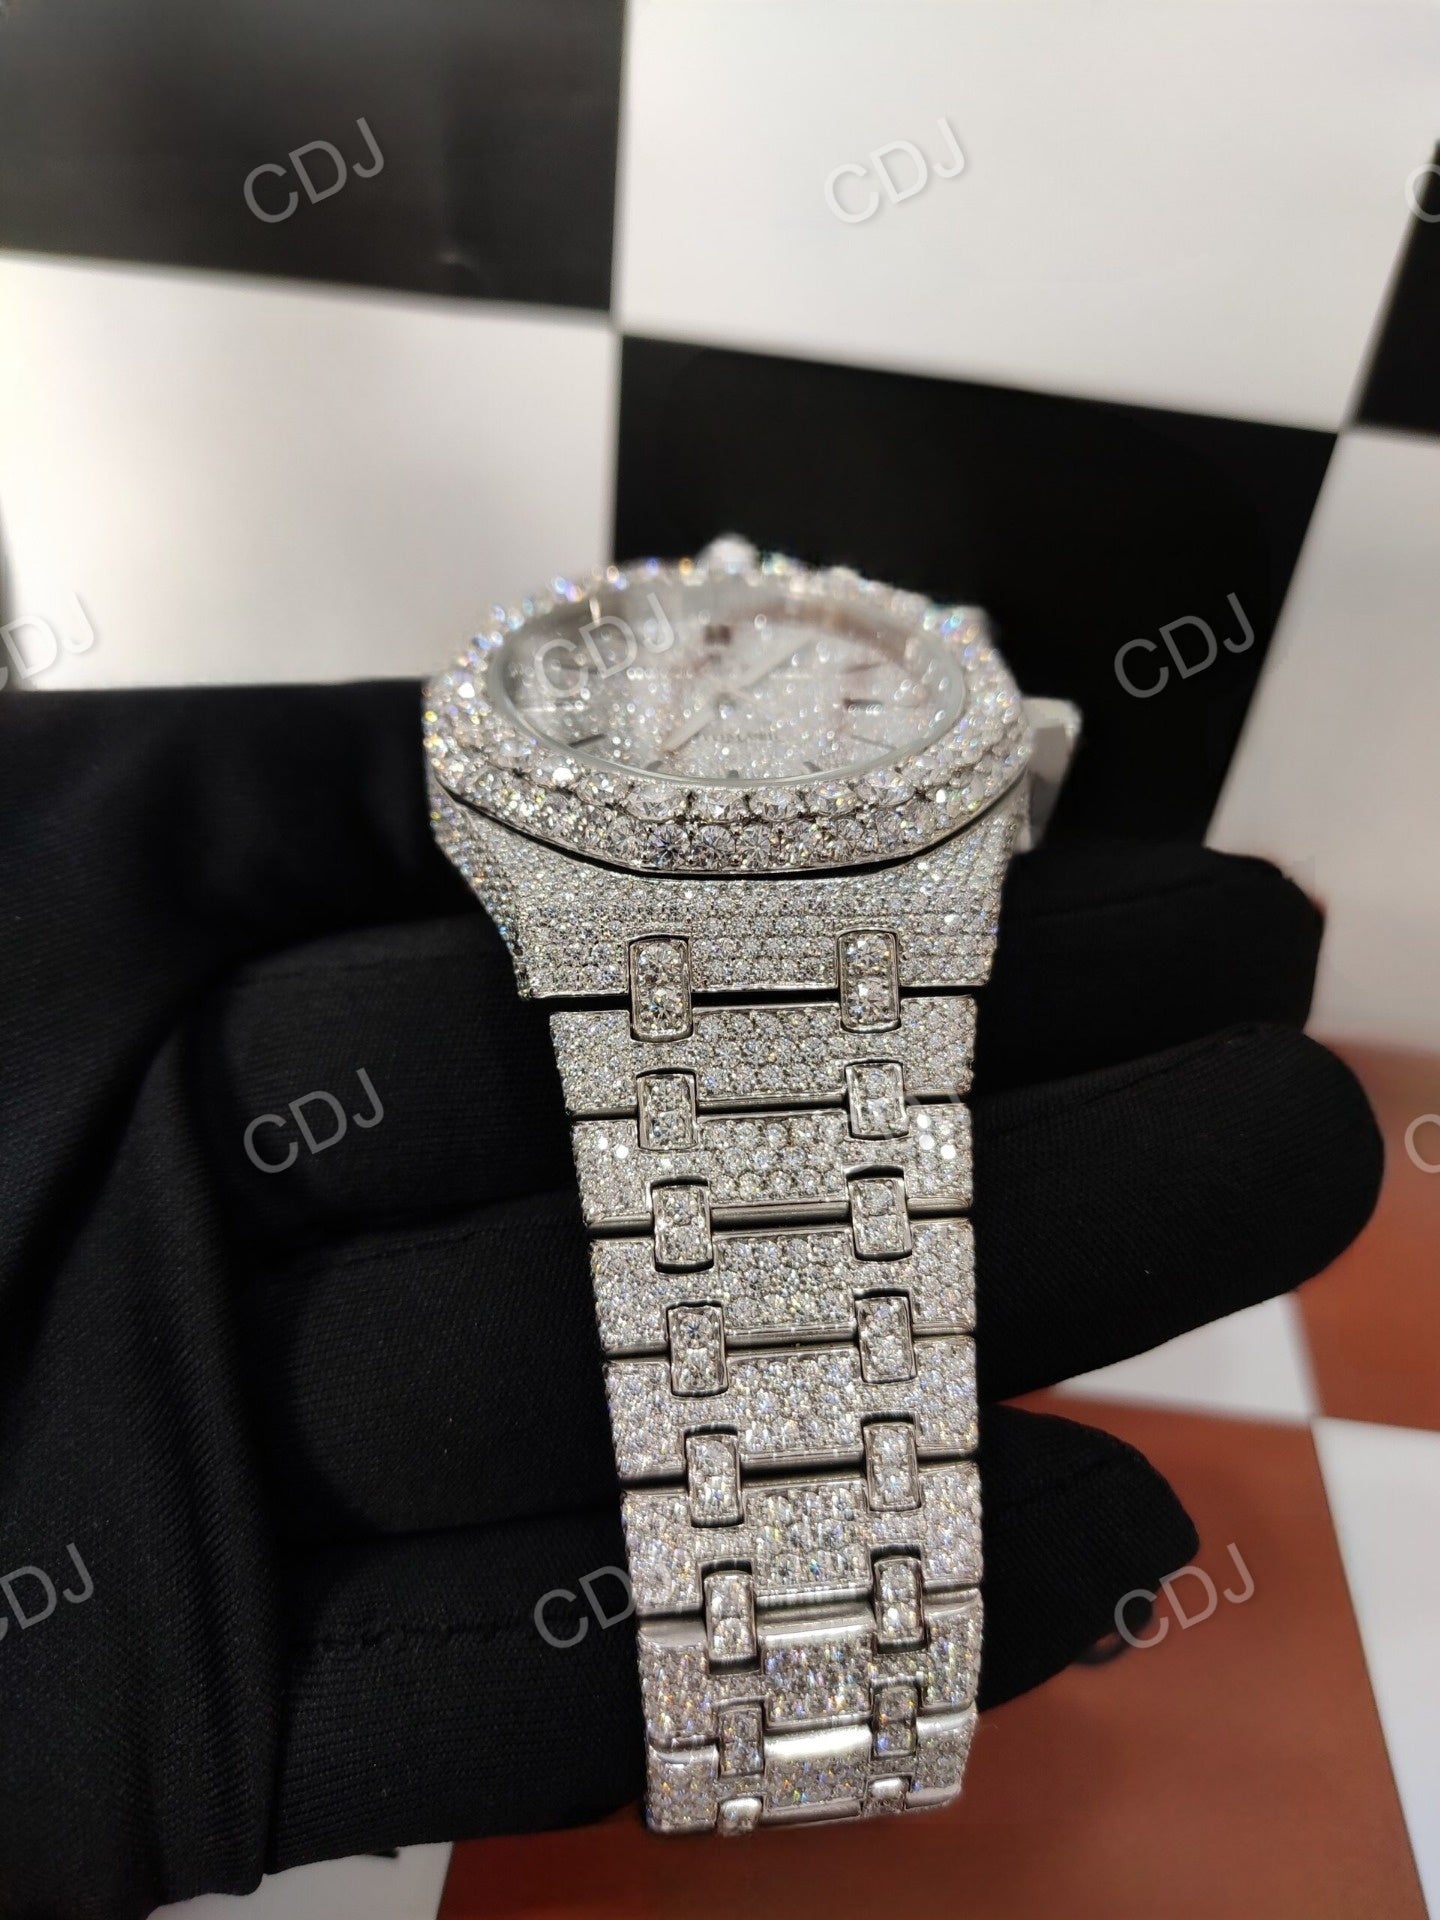 Newest High Quality VVS Certified Moissanite AP Real Watch Fully White Gold Plated Swiss Watches For Men  customdiamjewel   